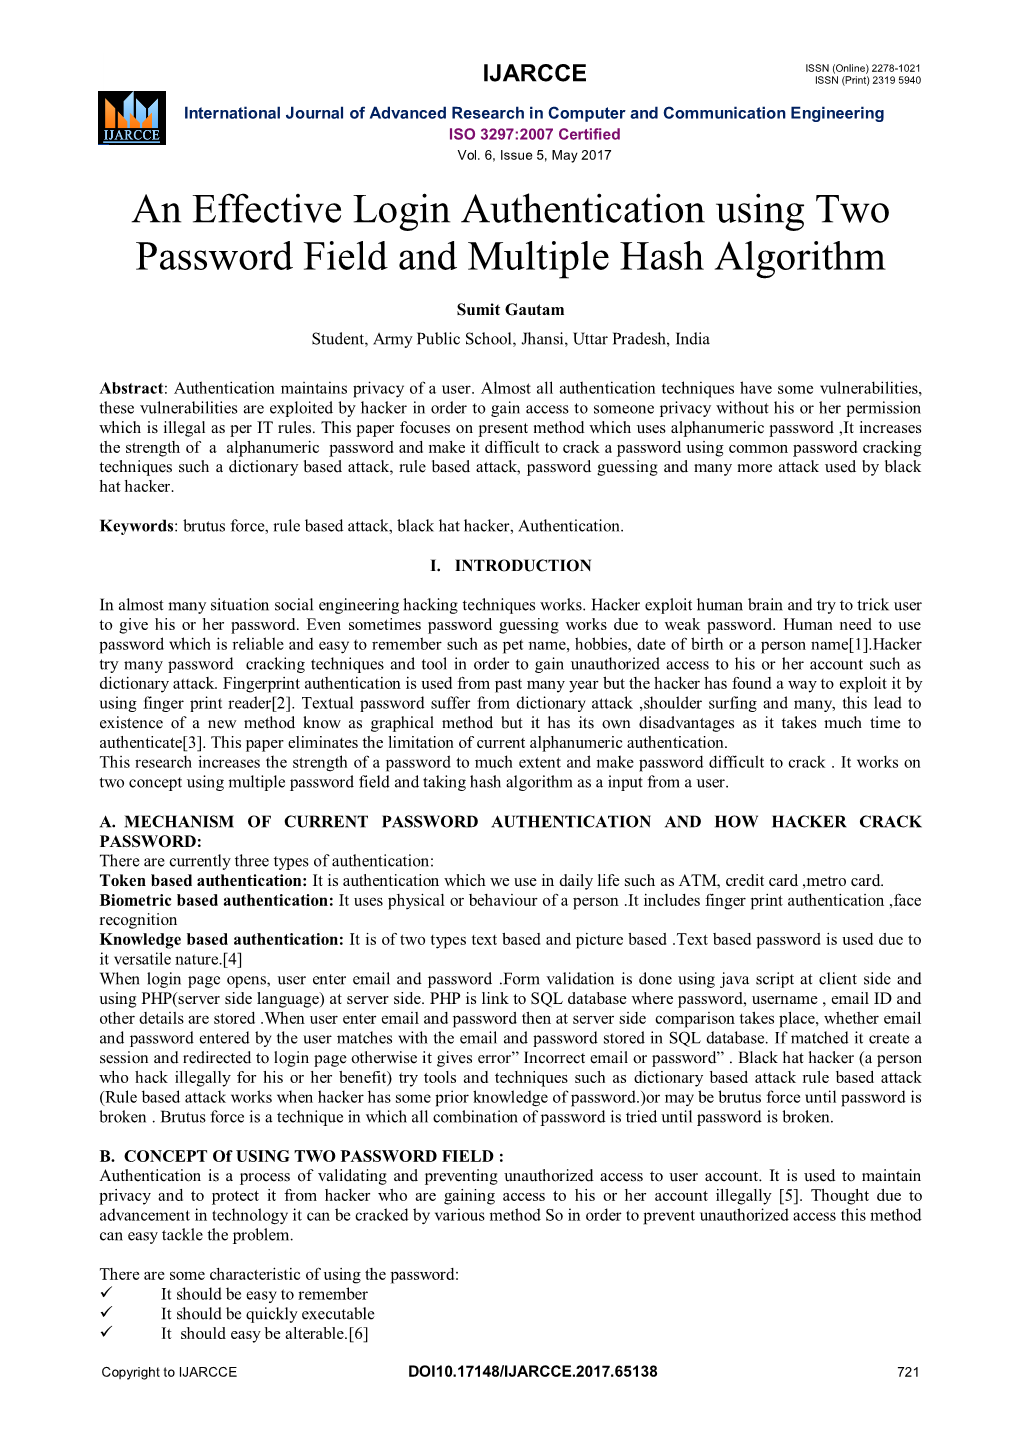 An Effective Login Authentication Using Two Password Field and Multiple Hash Algorithm